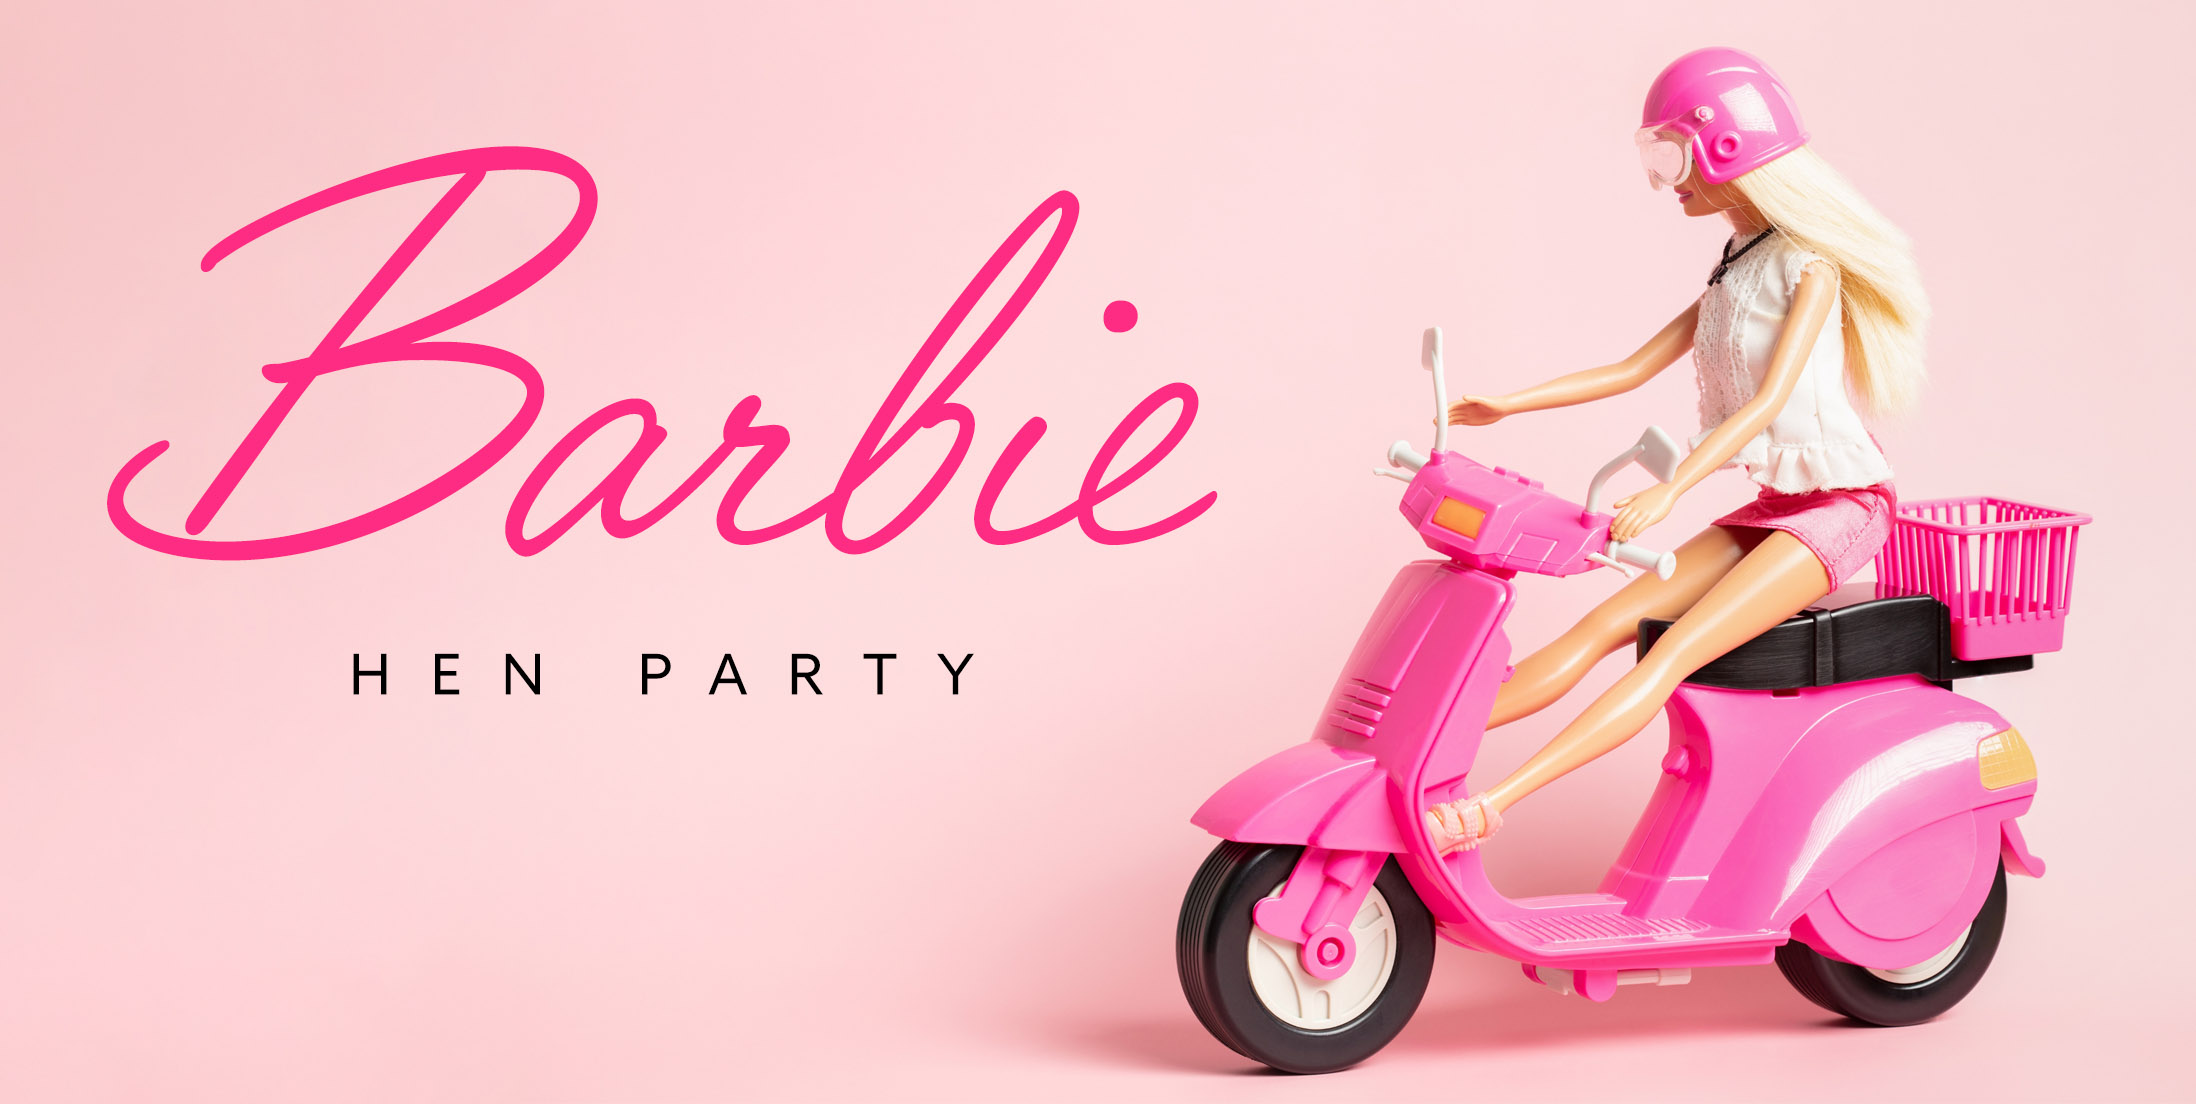 Barbie Themed Hen Party